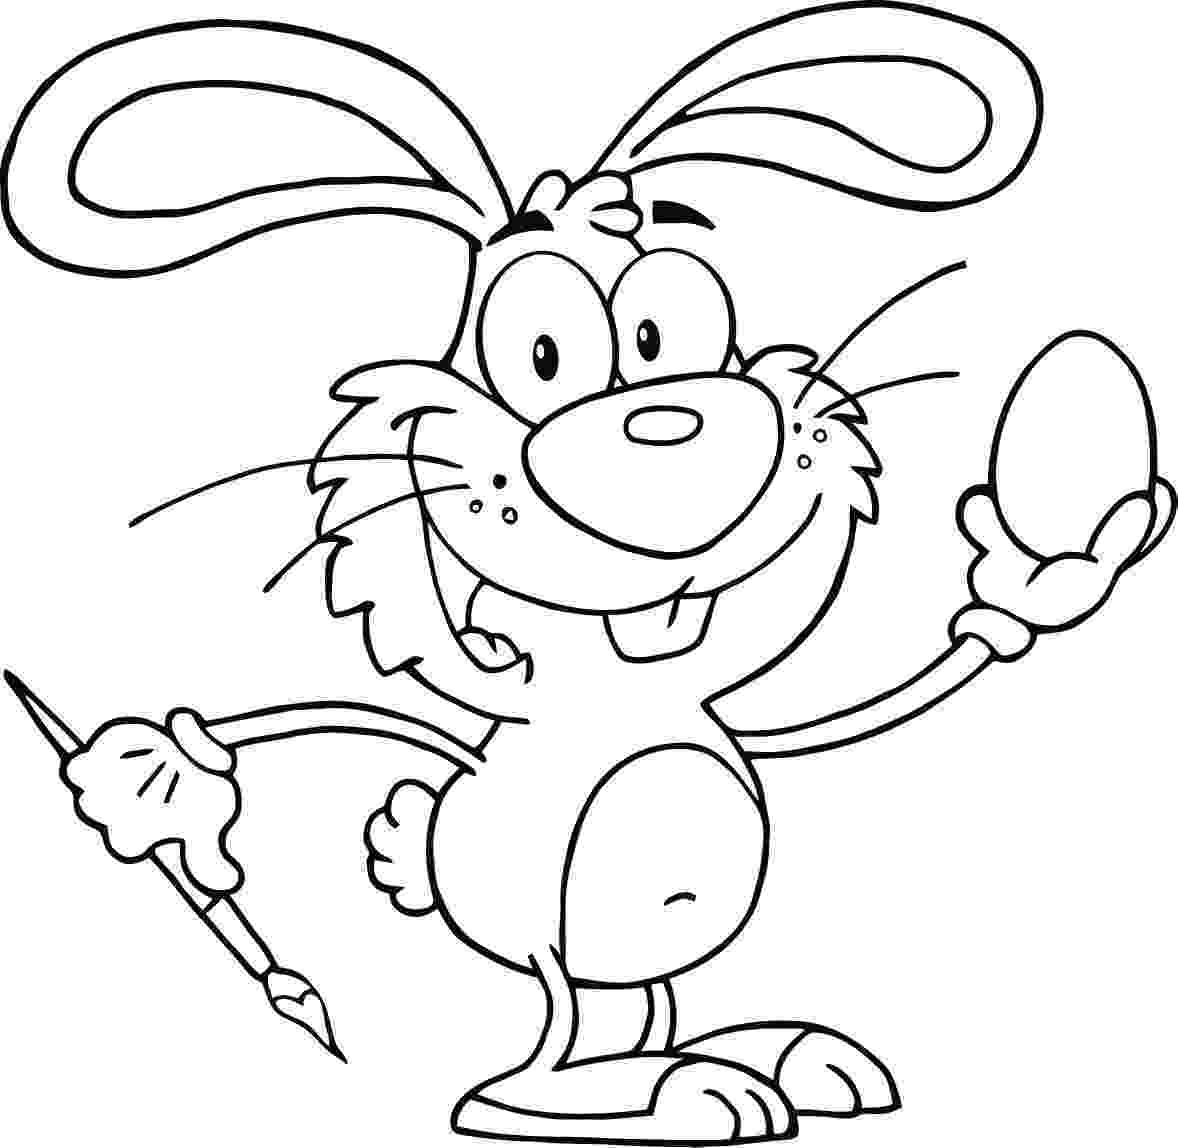 rabbit printable bunny coloring pages best coloring pages for kids rabbit printable 